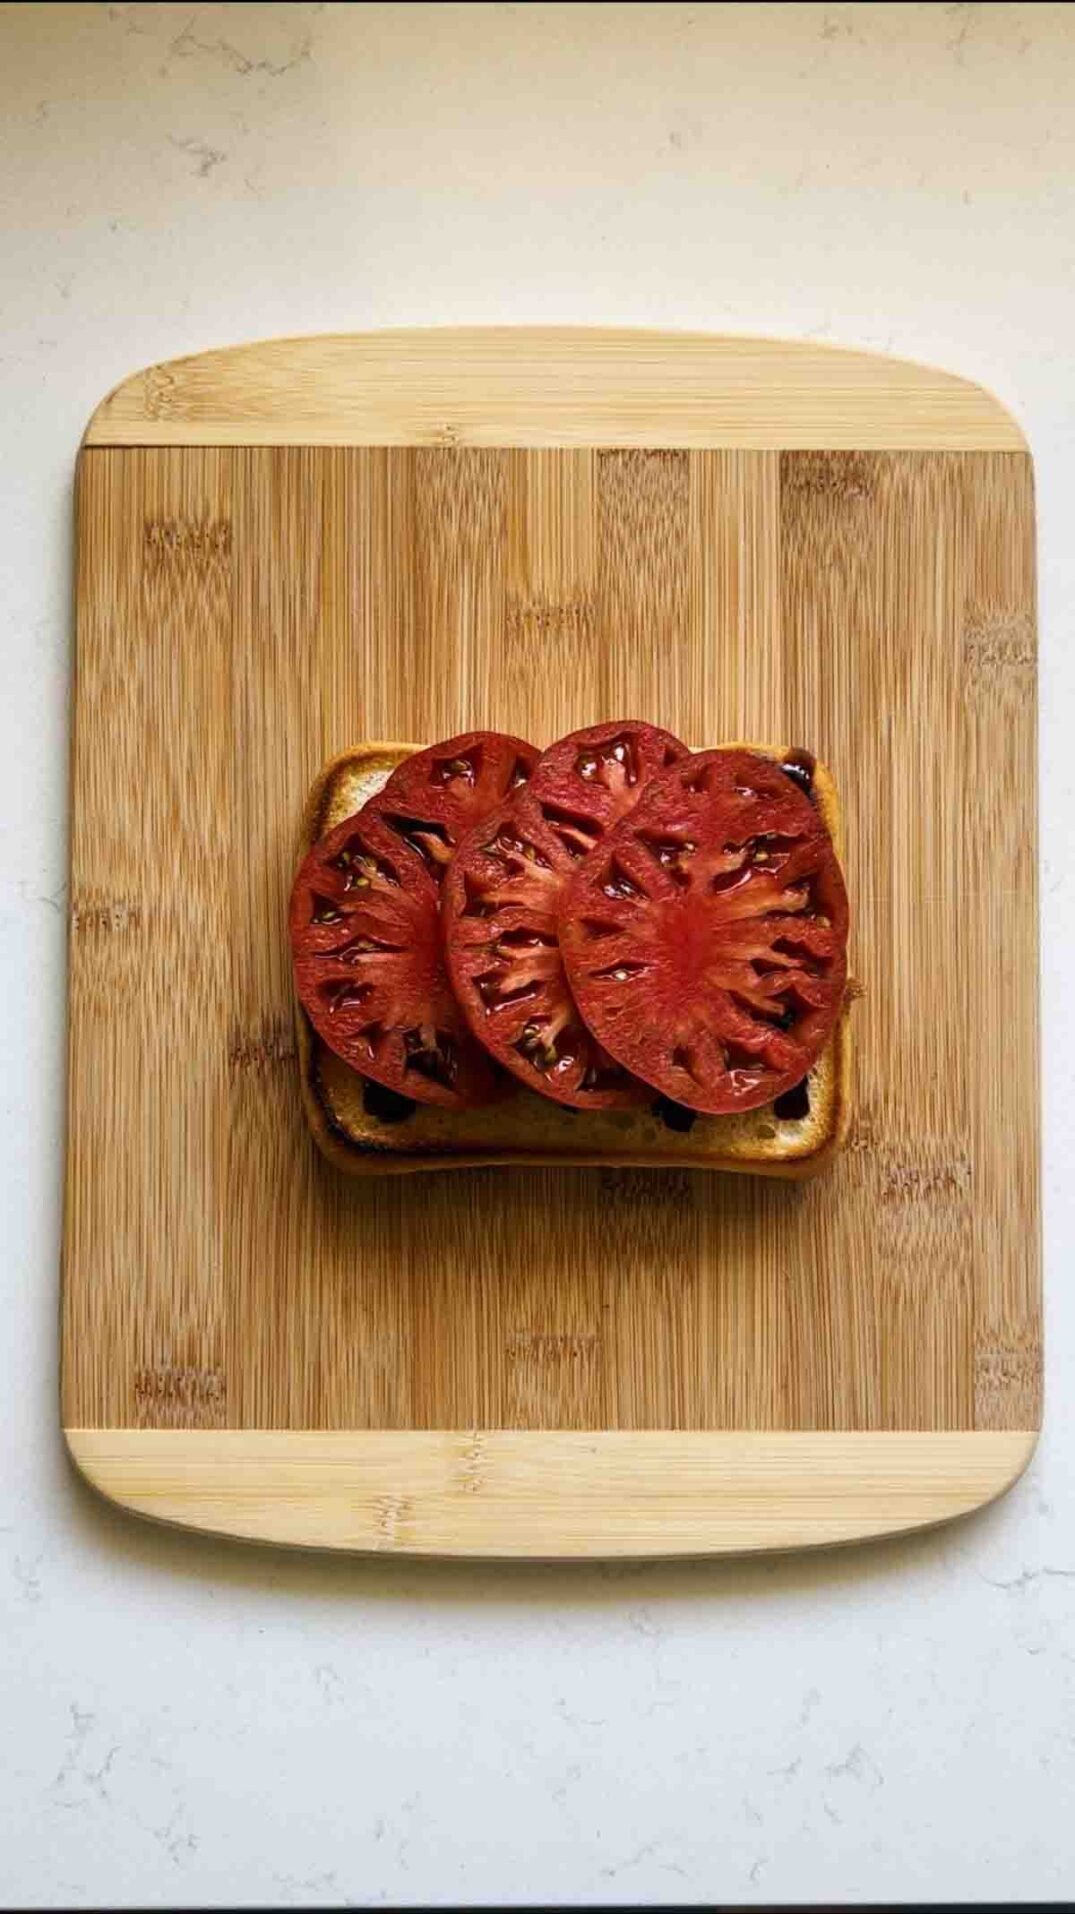 3 slices of fresh heirloom tomatoes that are dark red on a cutting board.